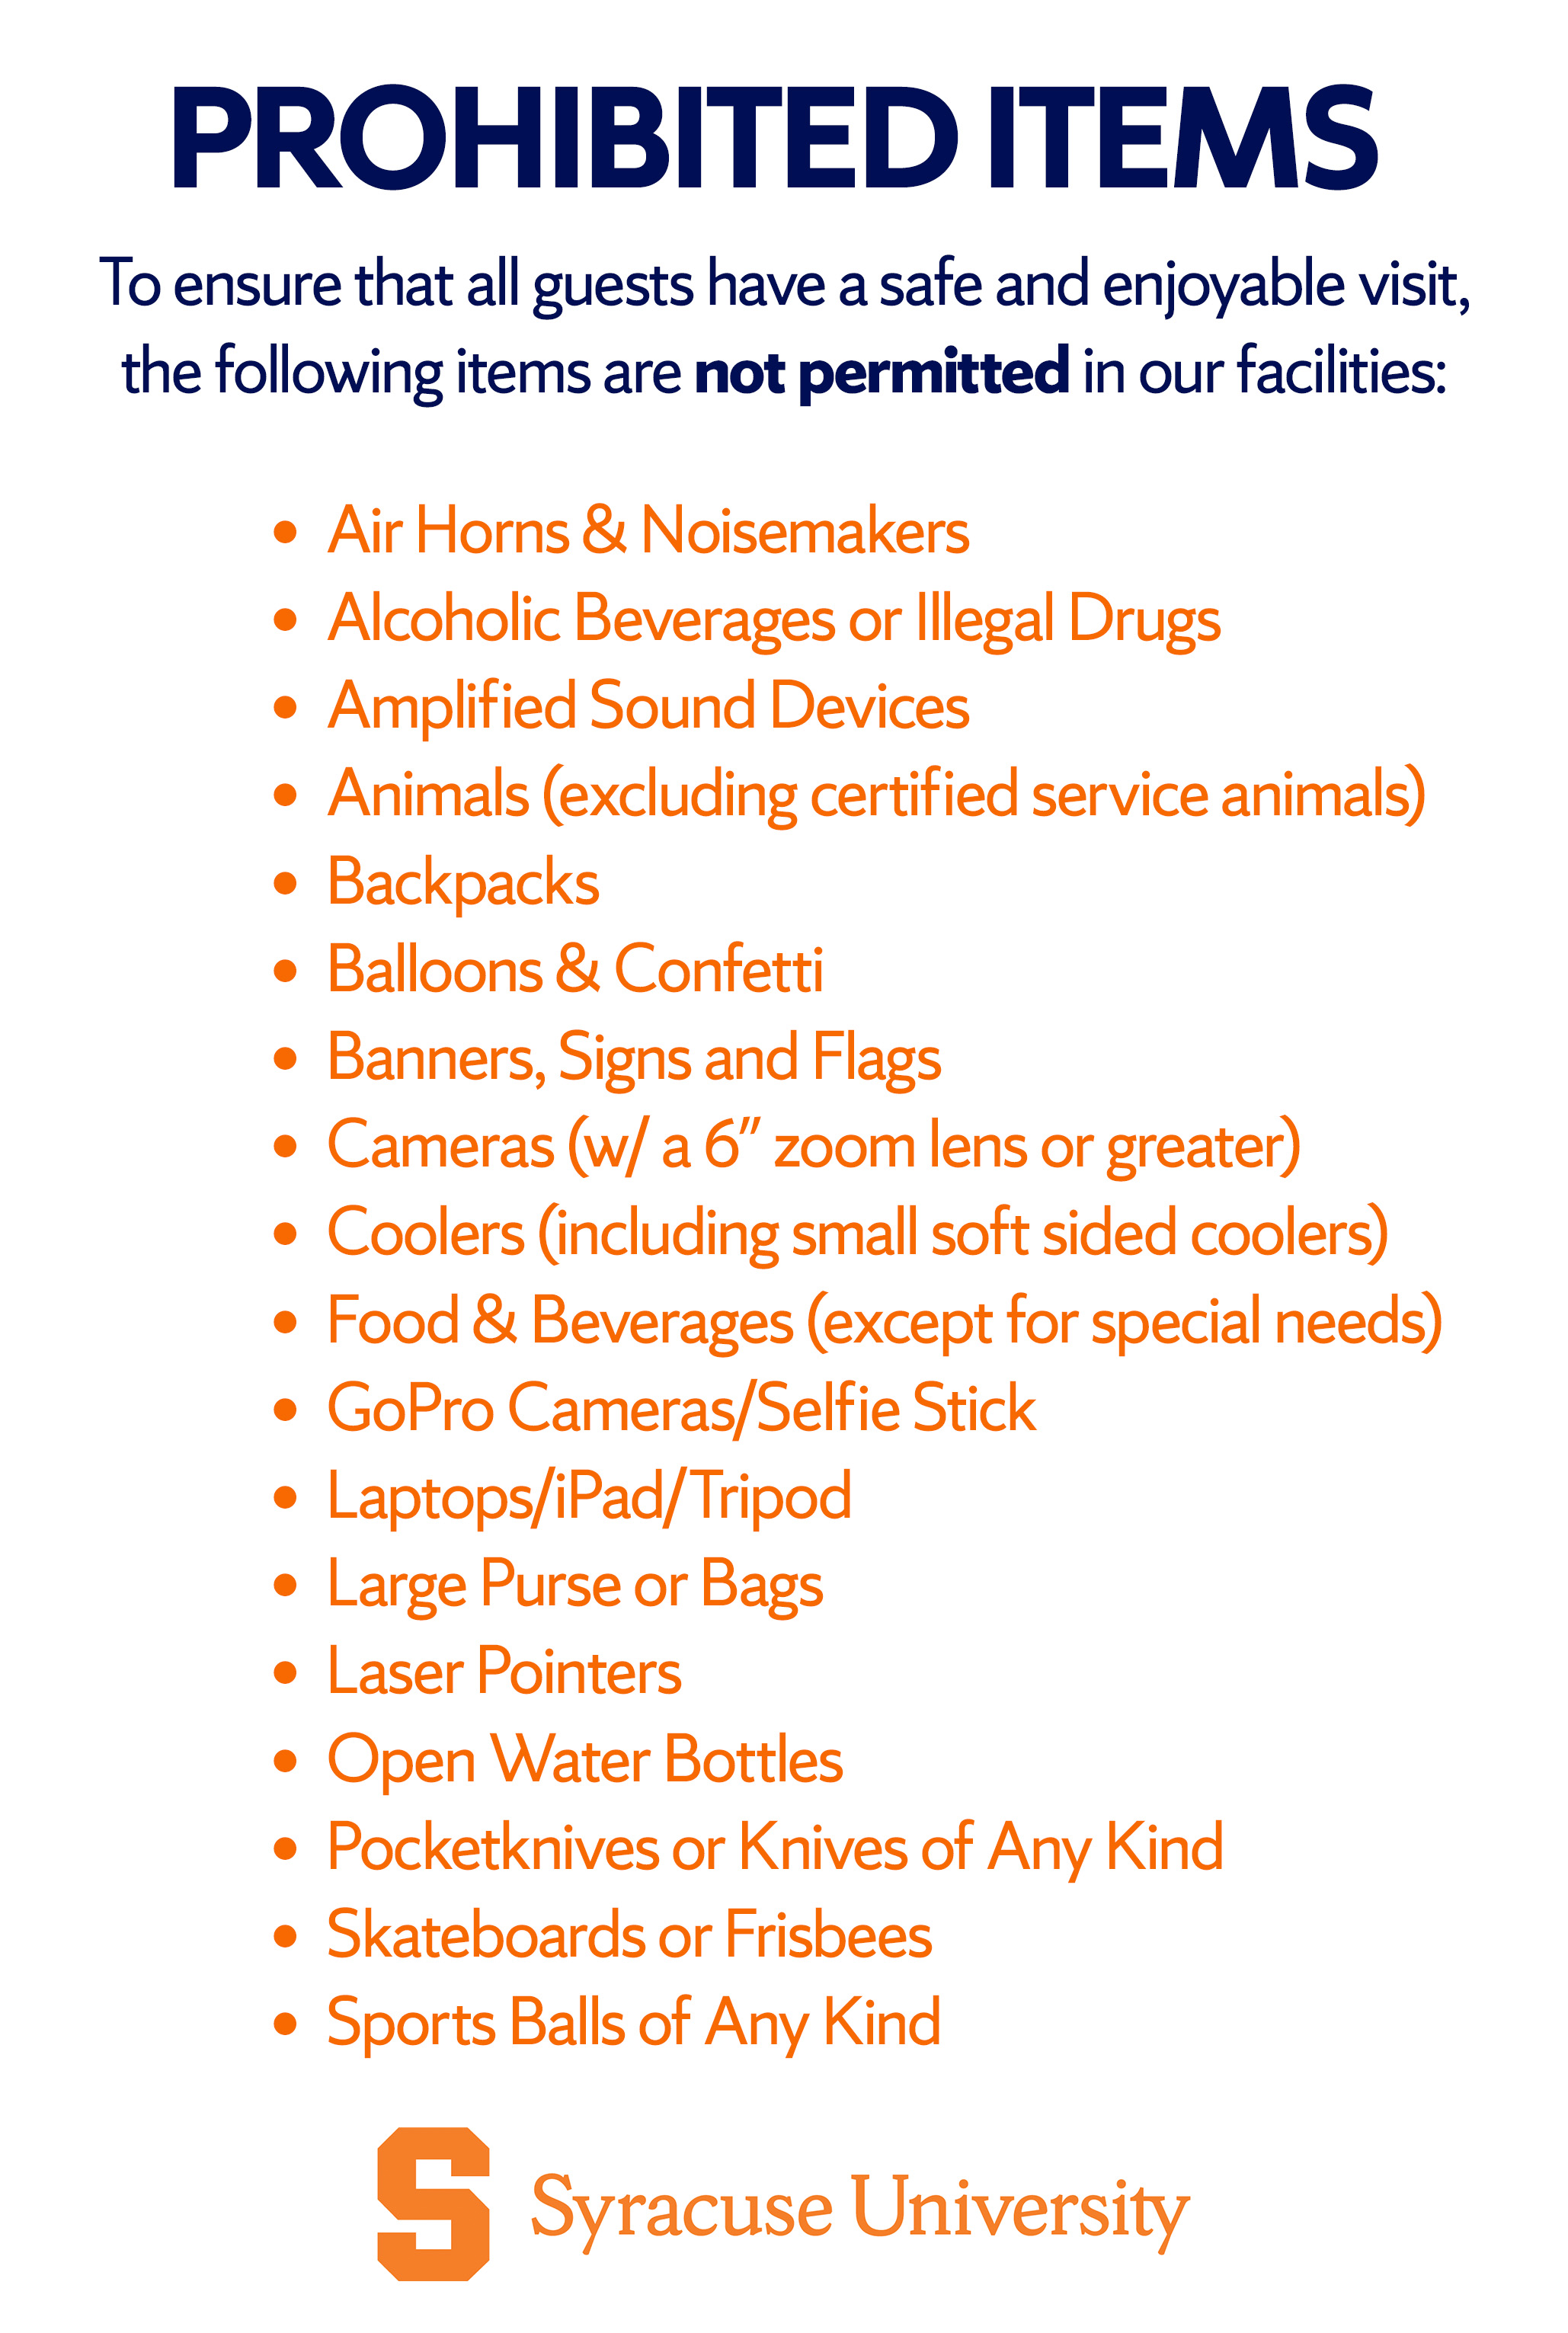 Graphic image that outlines prohibited items including banners, signs and flags as well as amplified sound devices